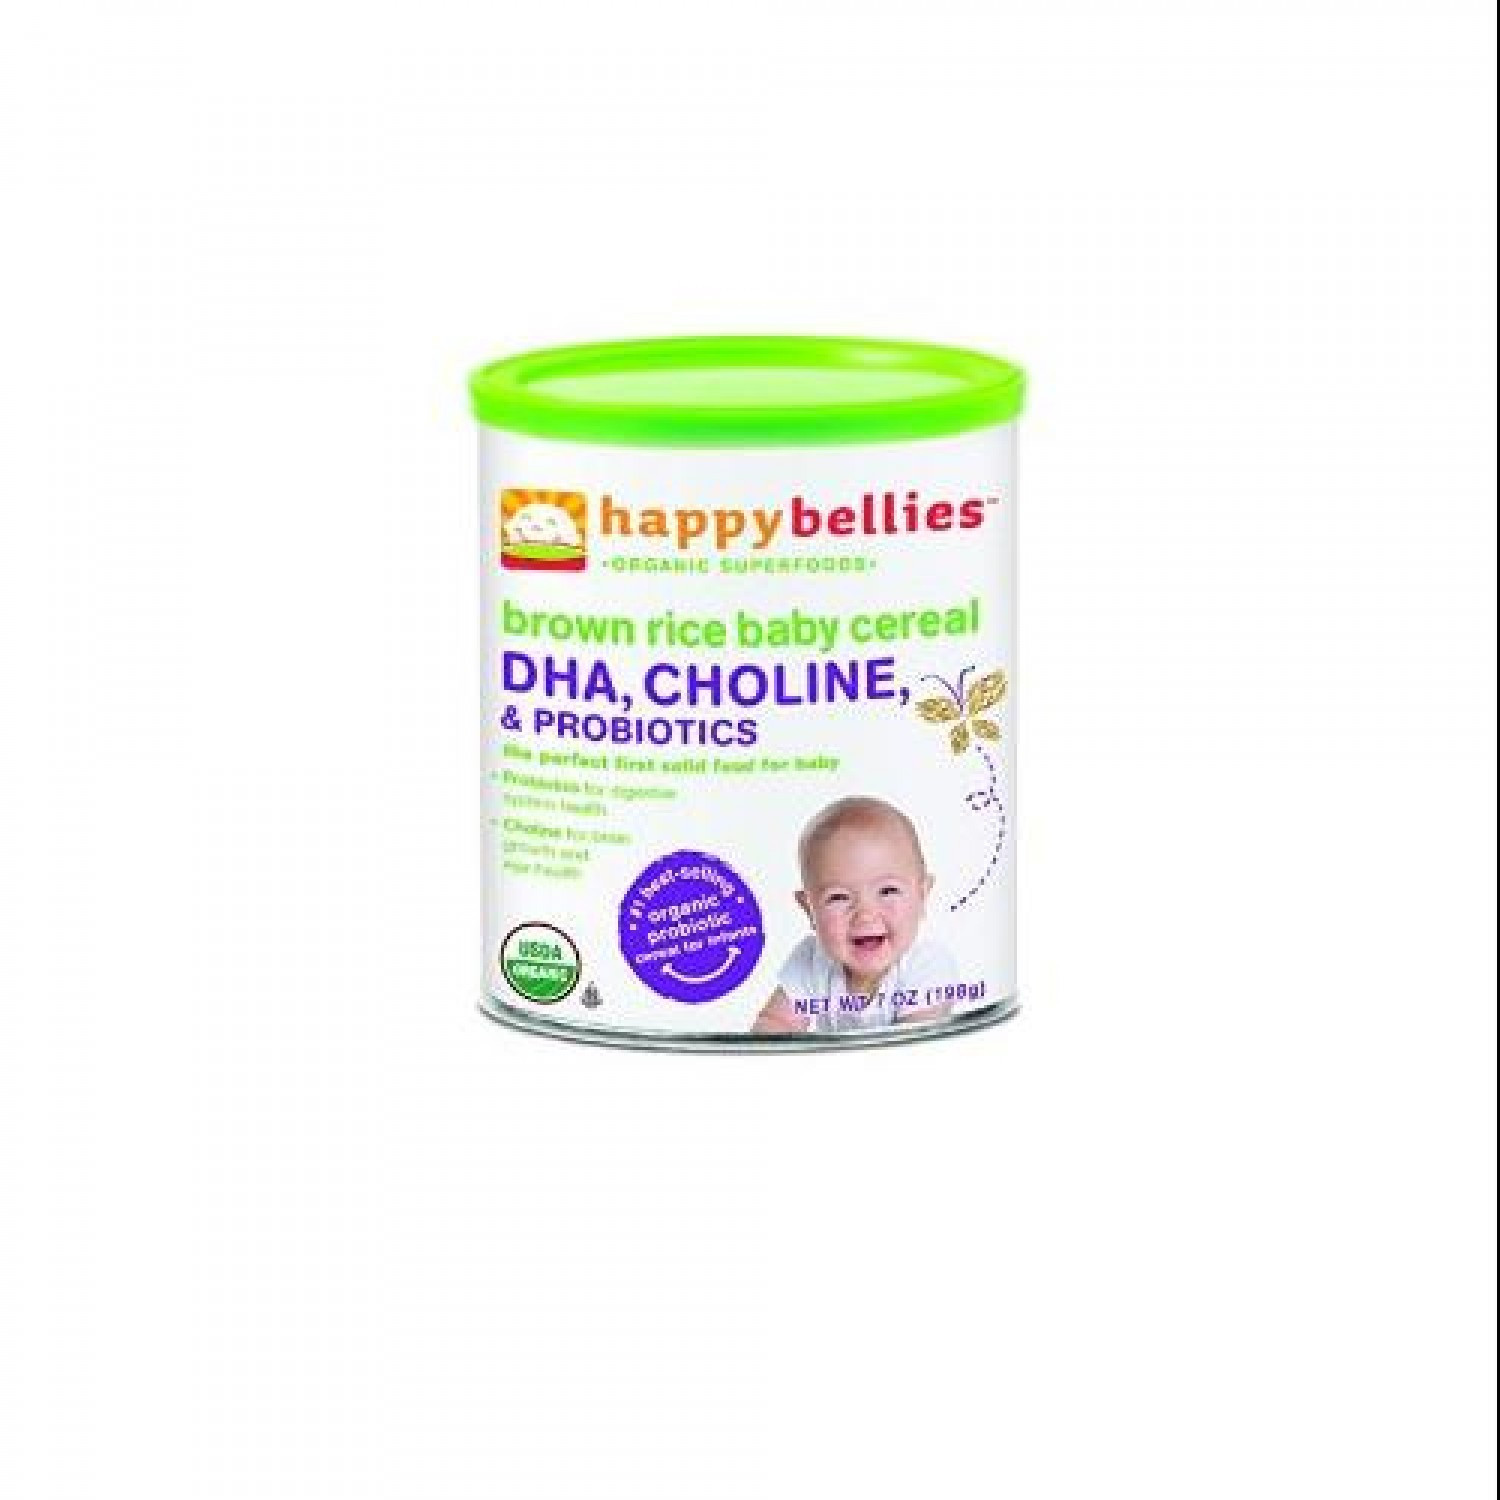 Happy Baby Brown Rice Cereal
 Happy Bellies Organic Baby Cereal with DHA Choline